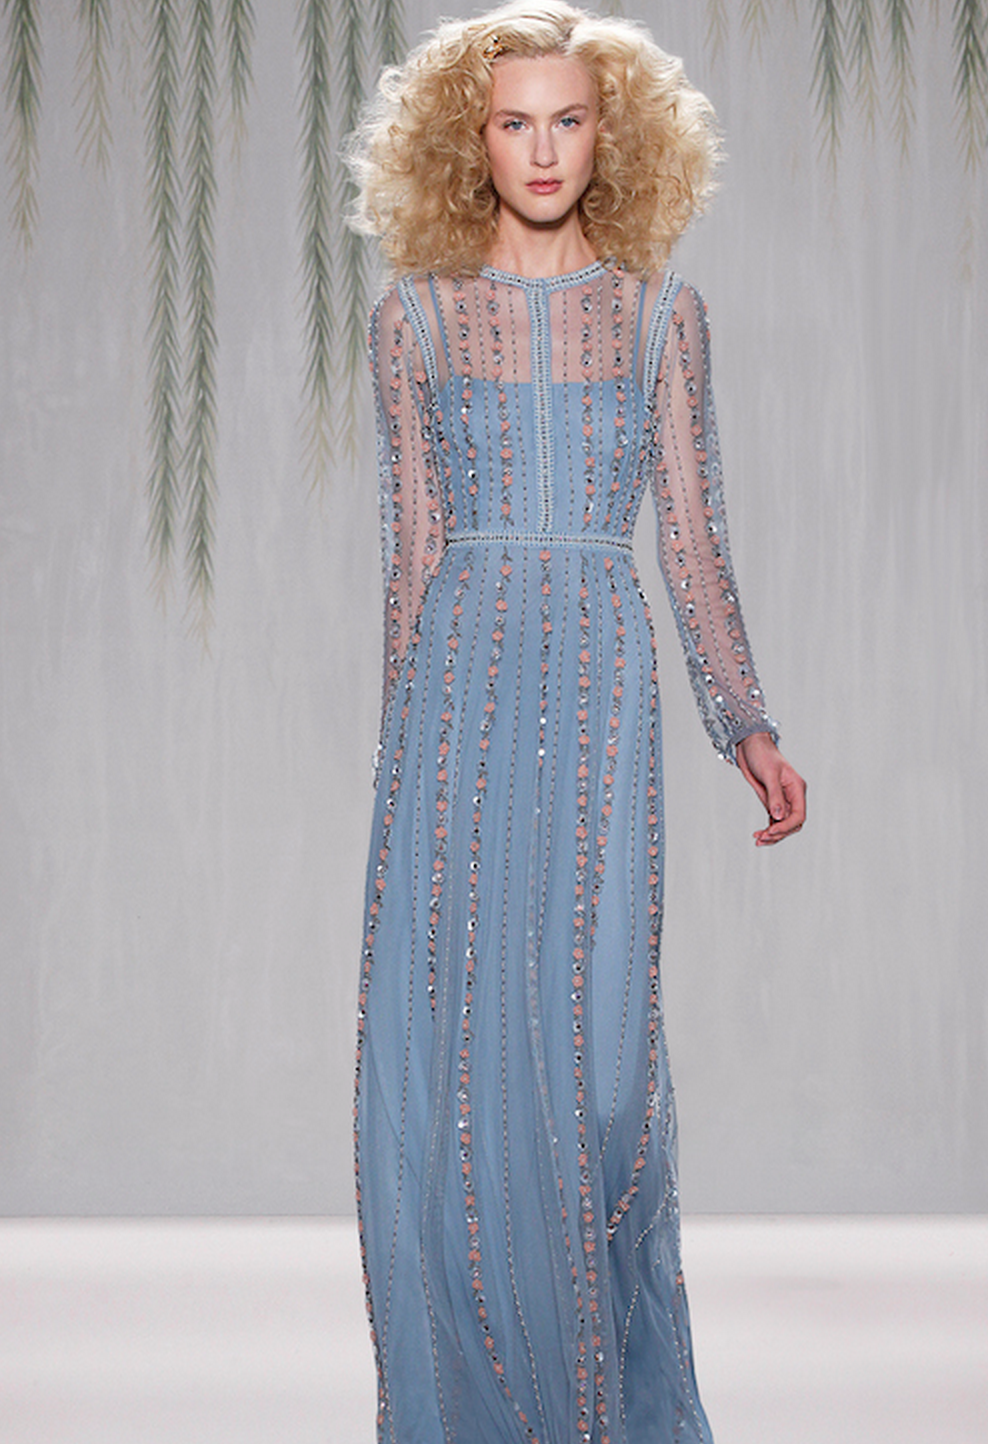 Jenny Packham Gown - Spring 2014 Ready-To-Wear Collection